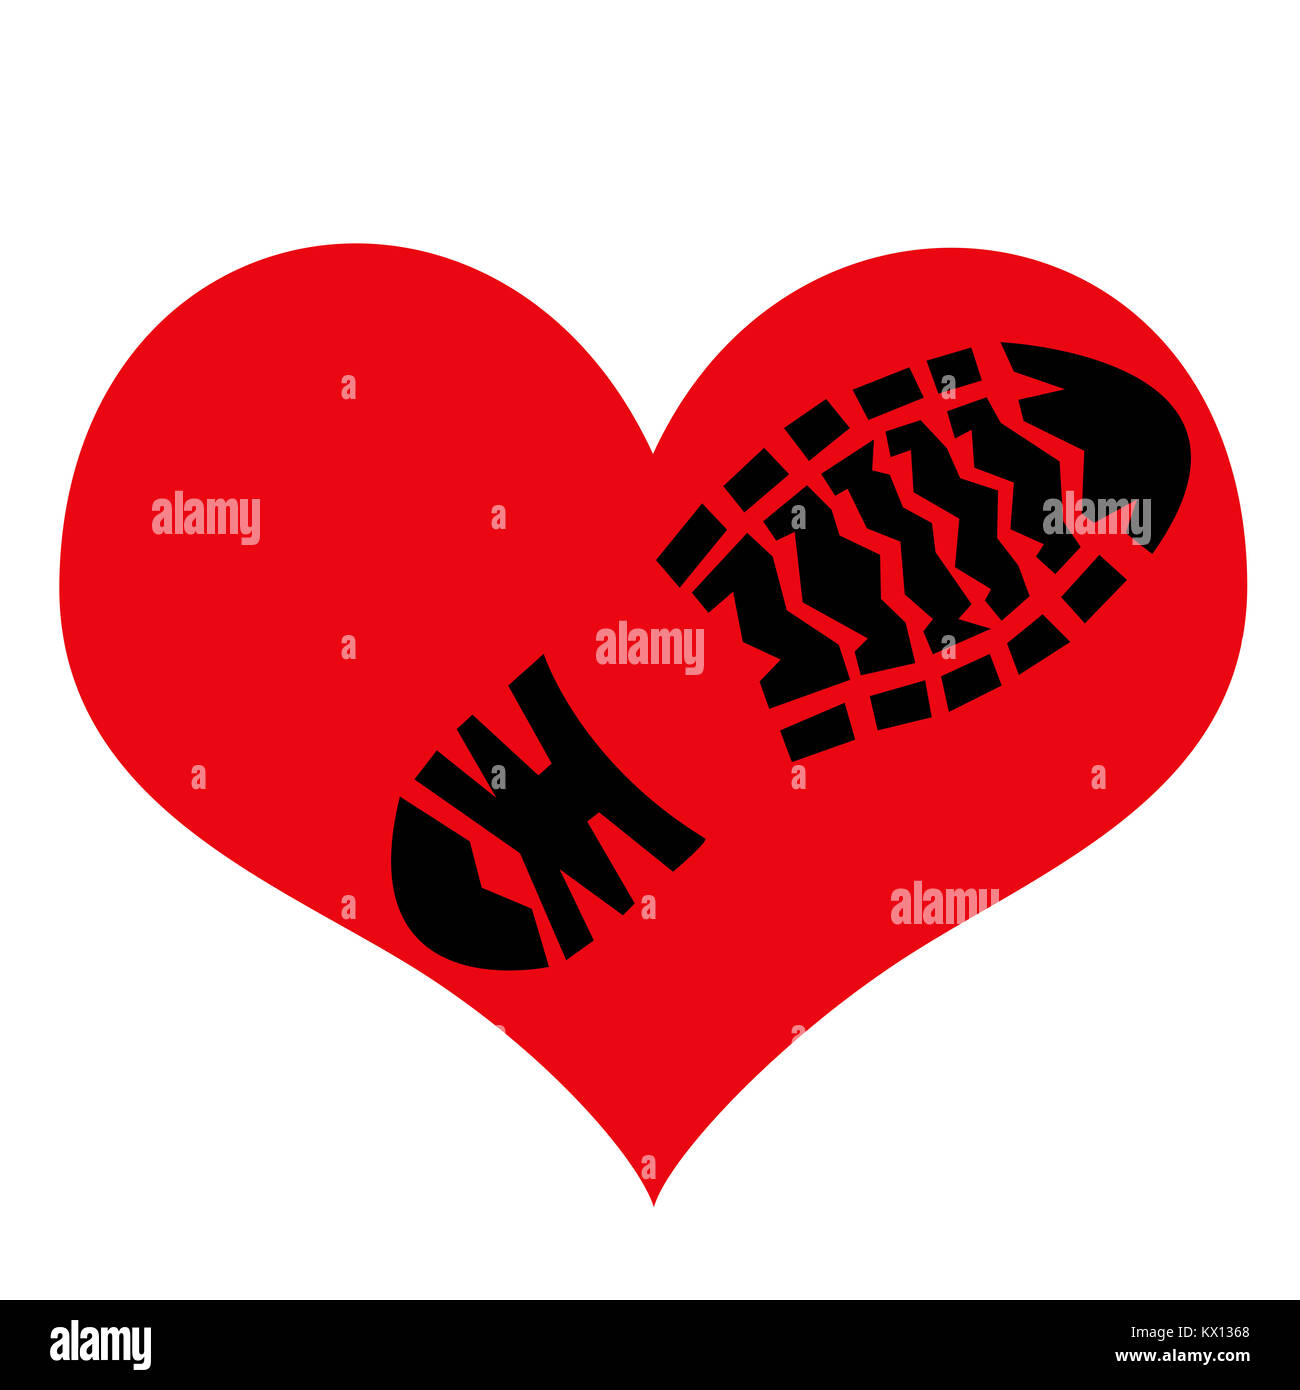 Imprint of the rough sole of the shoe on the symbol of love. Illustration. Stock Photo